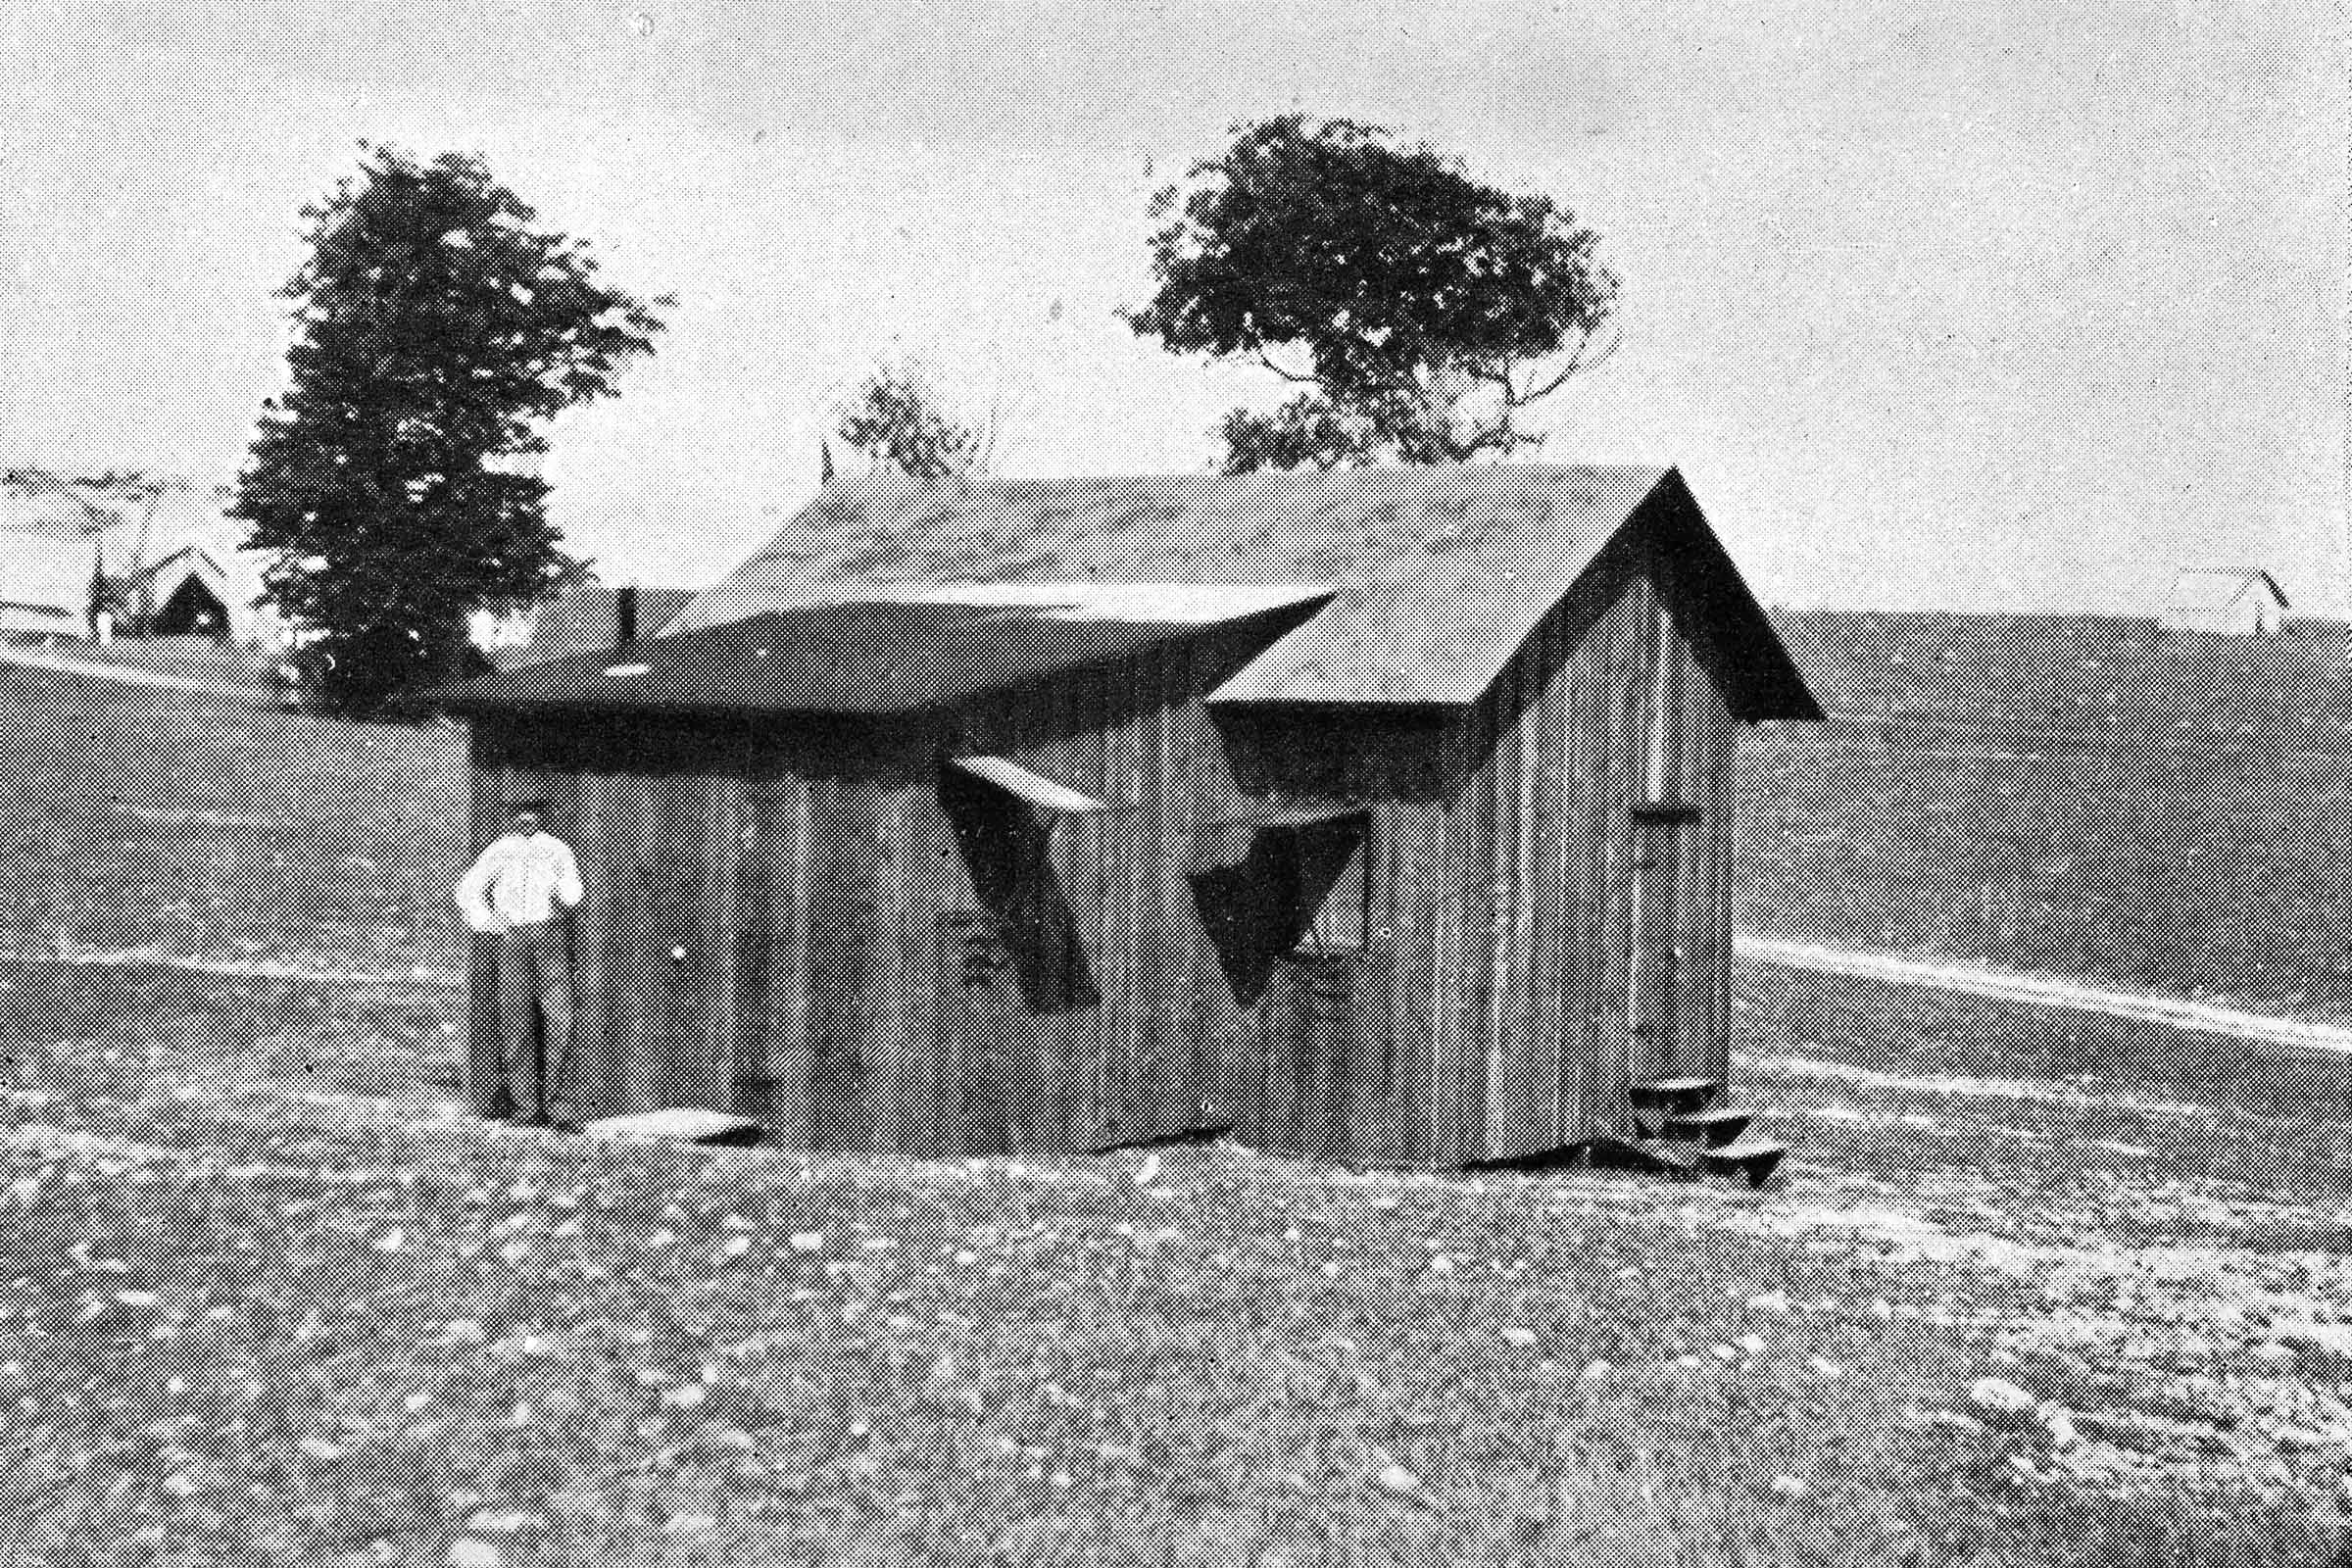 Black and white photo of a man standing outside of a small wooden house